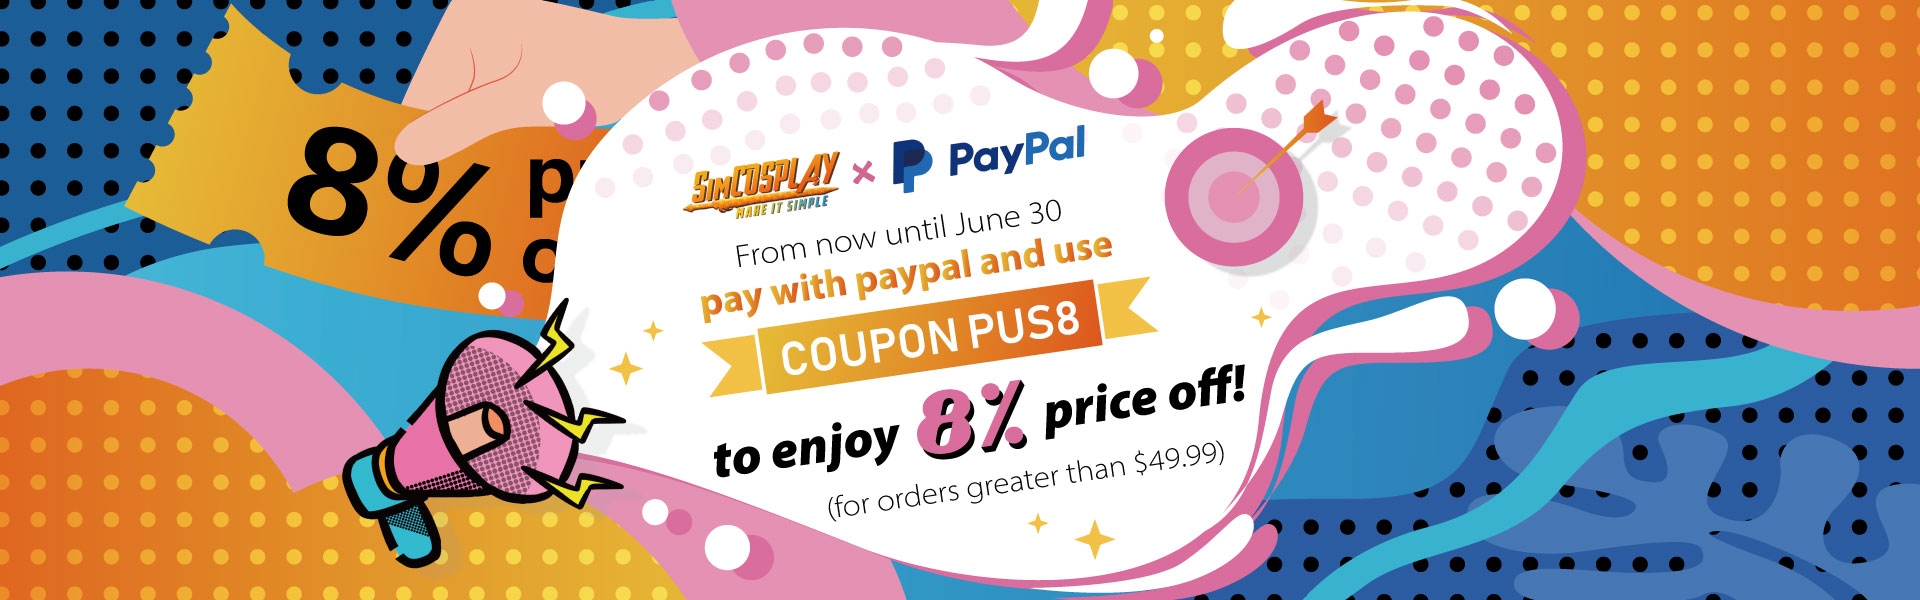 simcosplay discount code with paypal